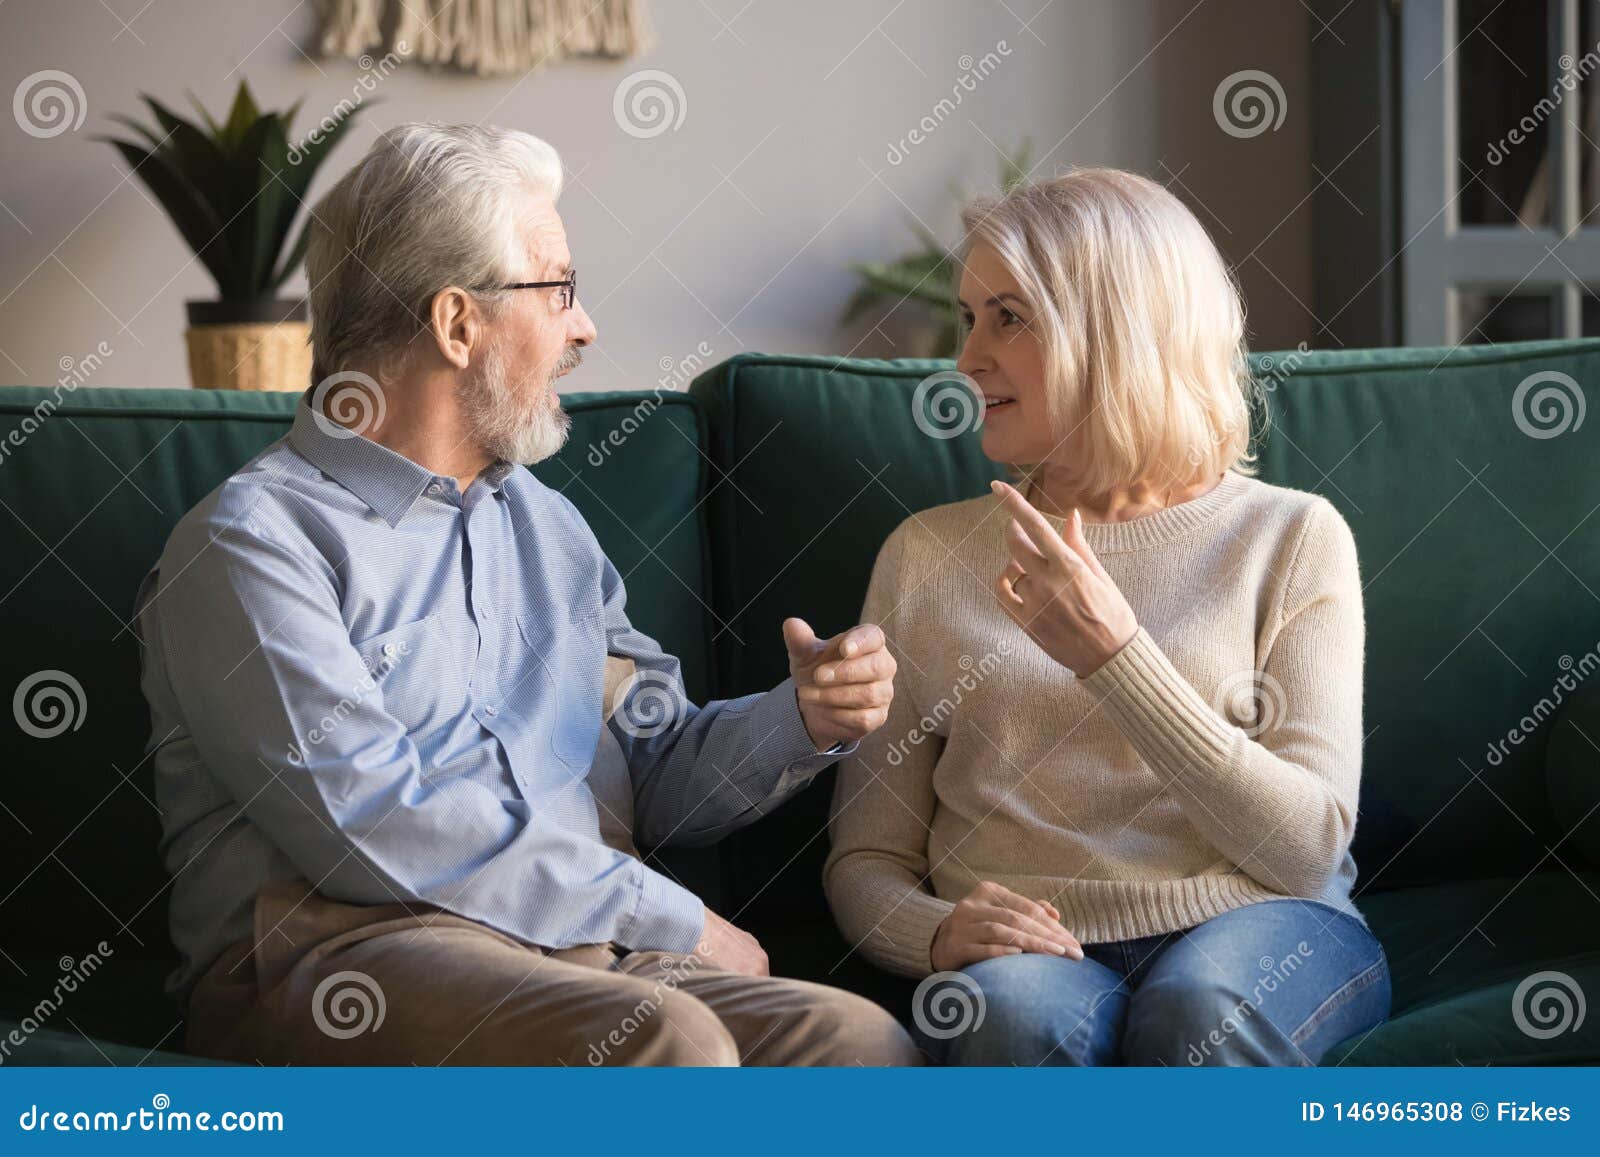 Mature wife com Happy Aged Family Mature Wife And Husband Talking At Home Stock Photo Image Of Healthy Enjoy 146965308